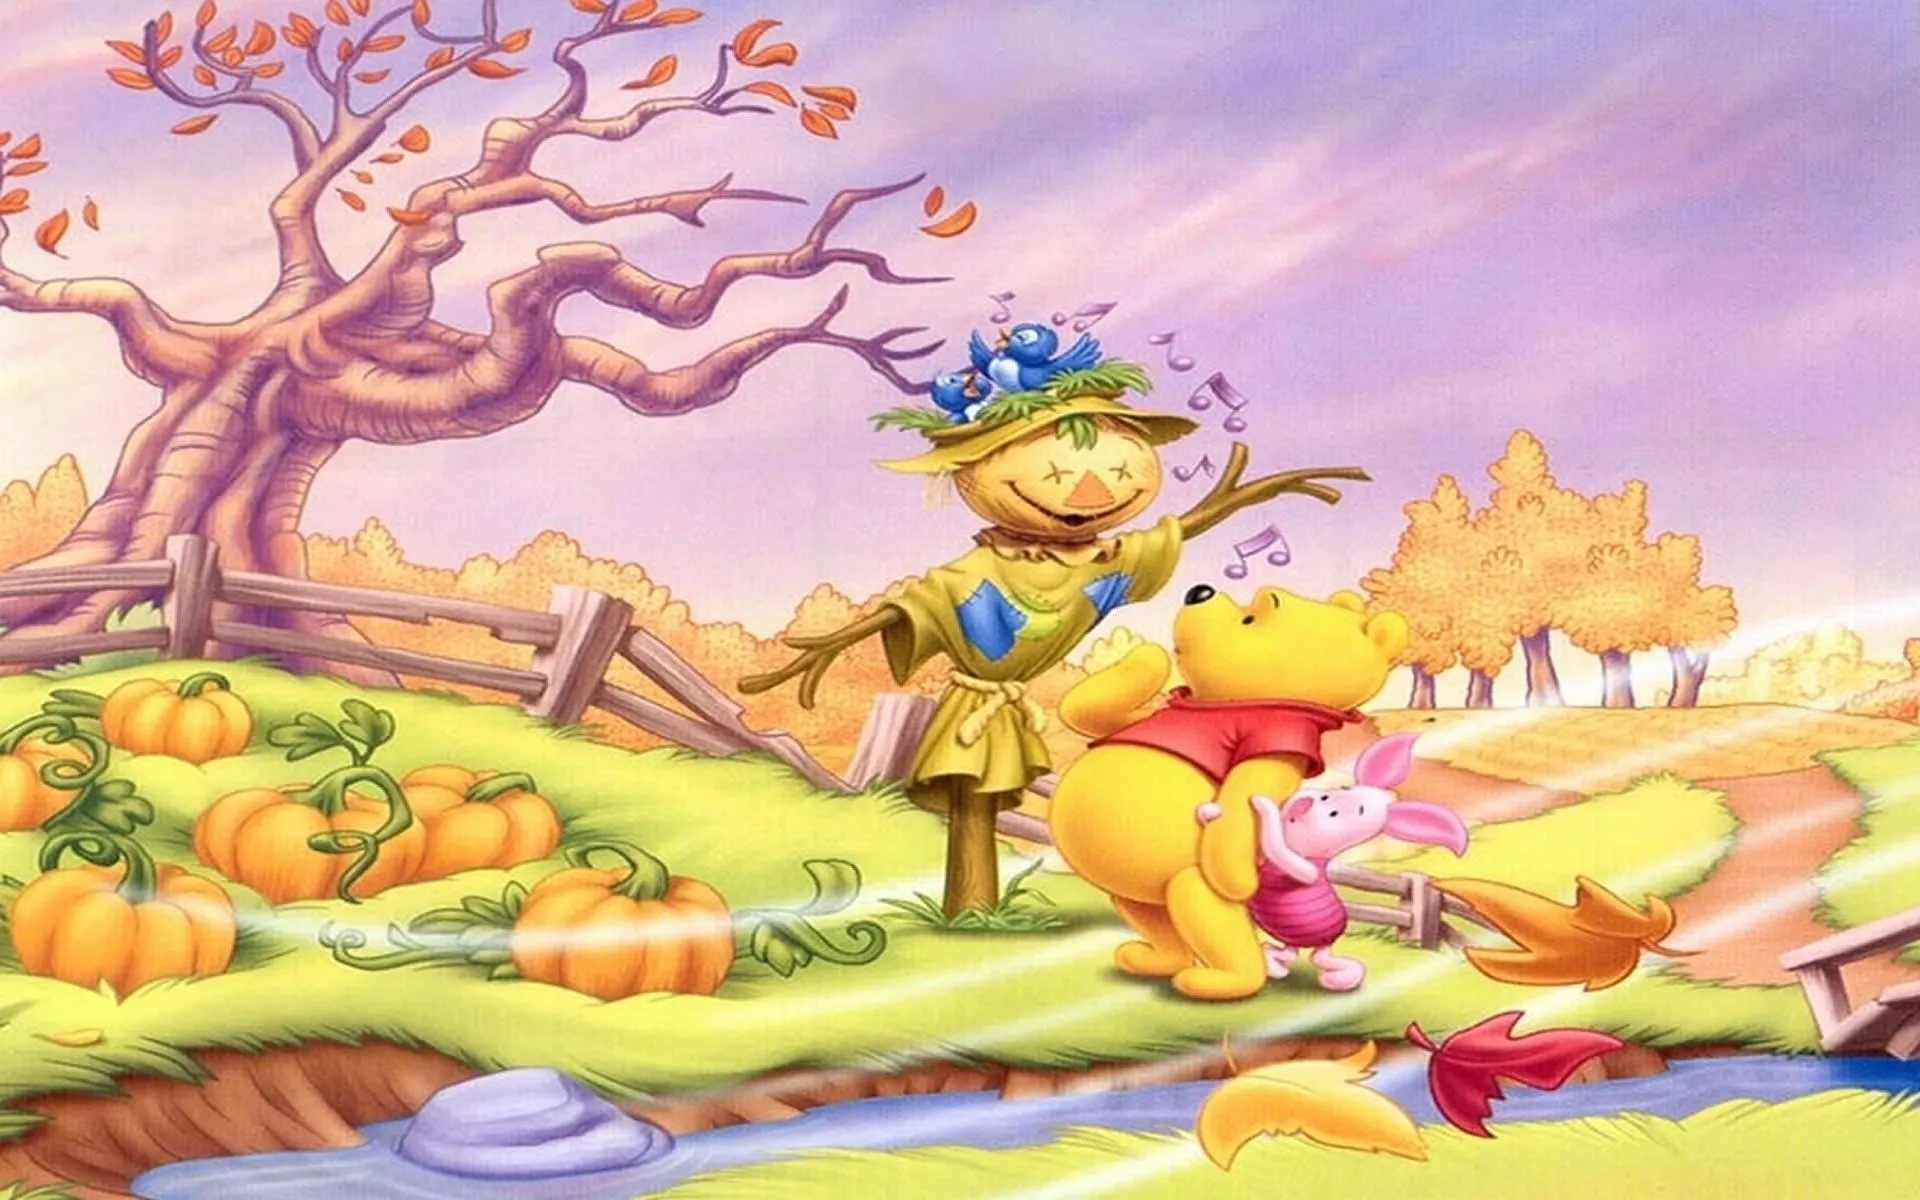 Wallpaper Winnie The Pooh - Wallpapers